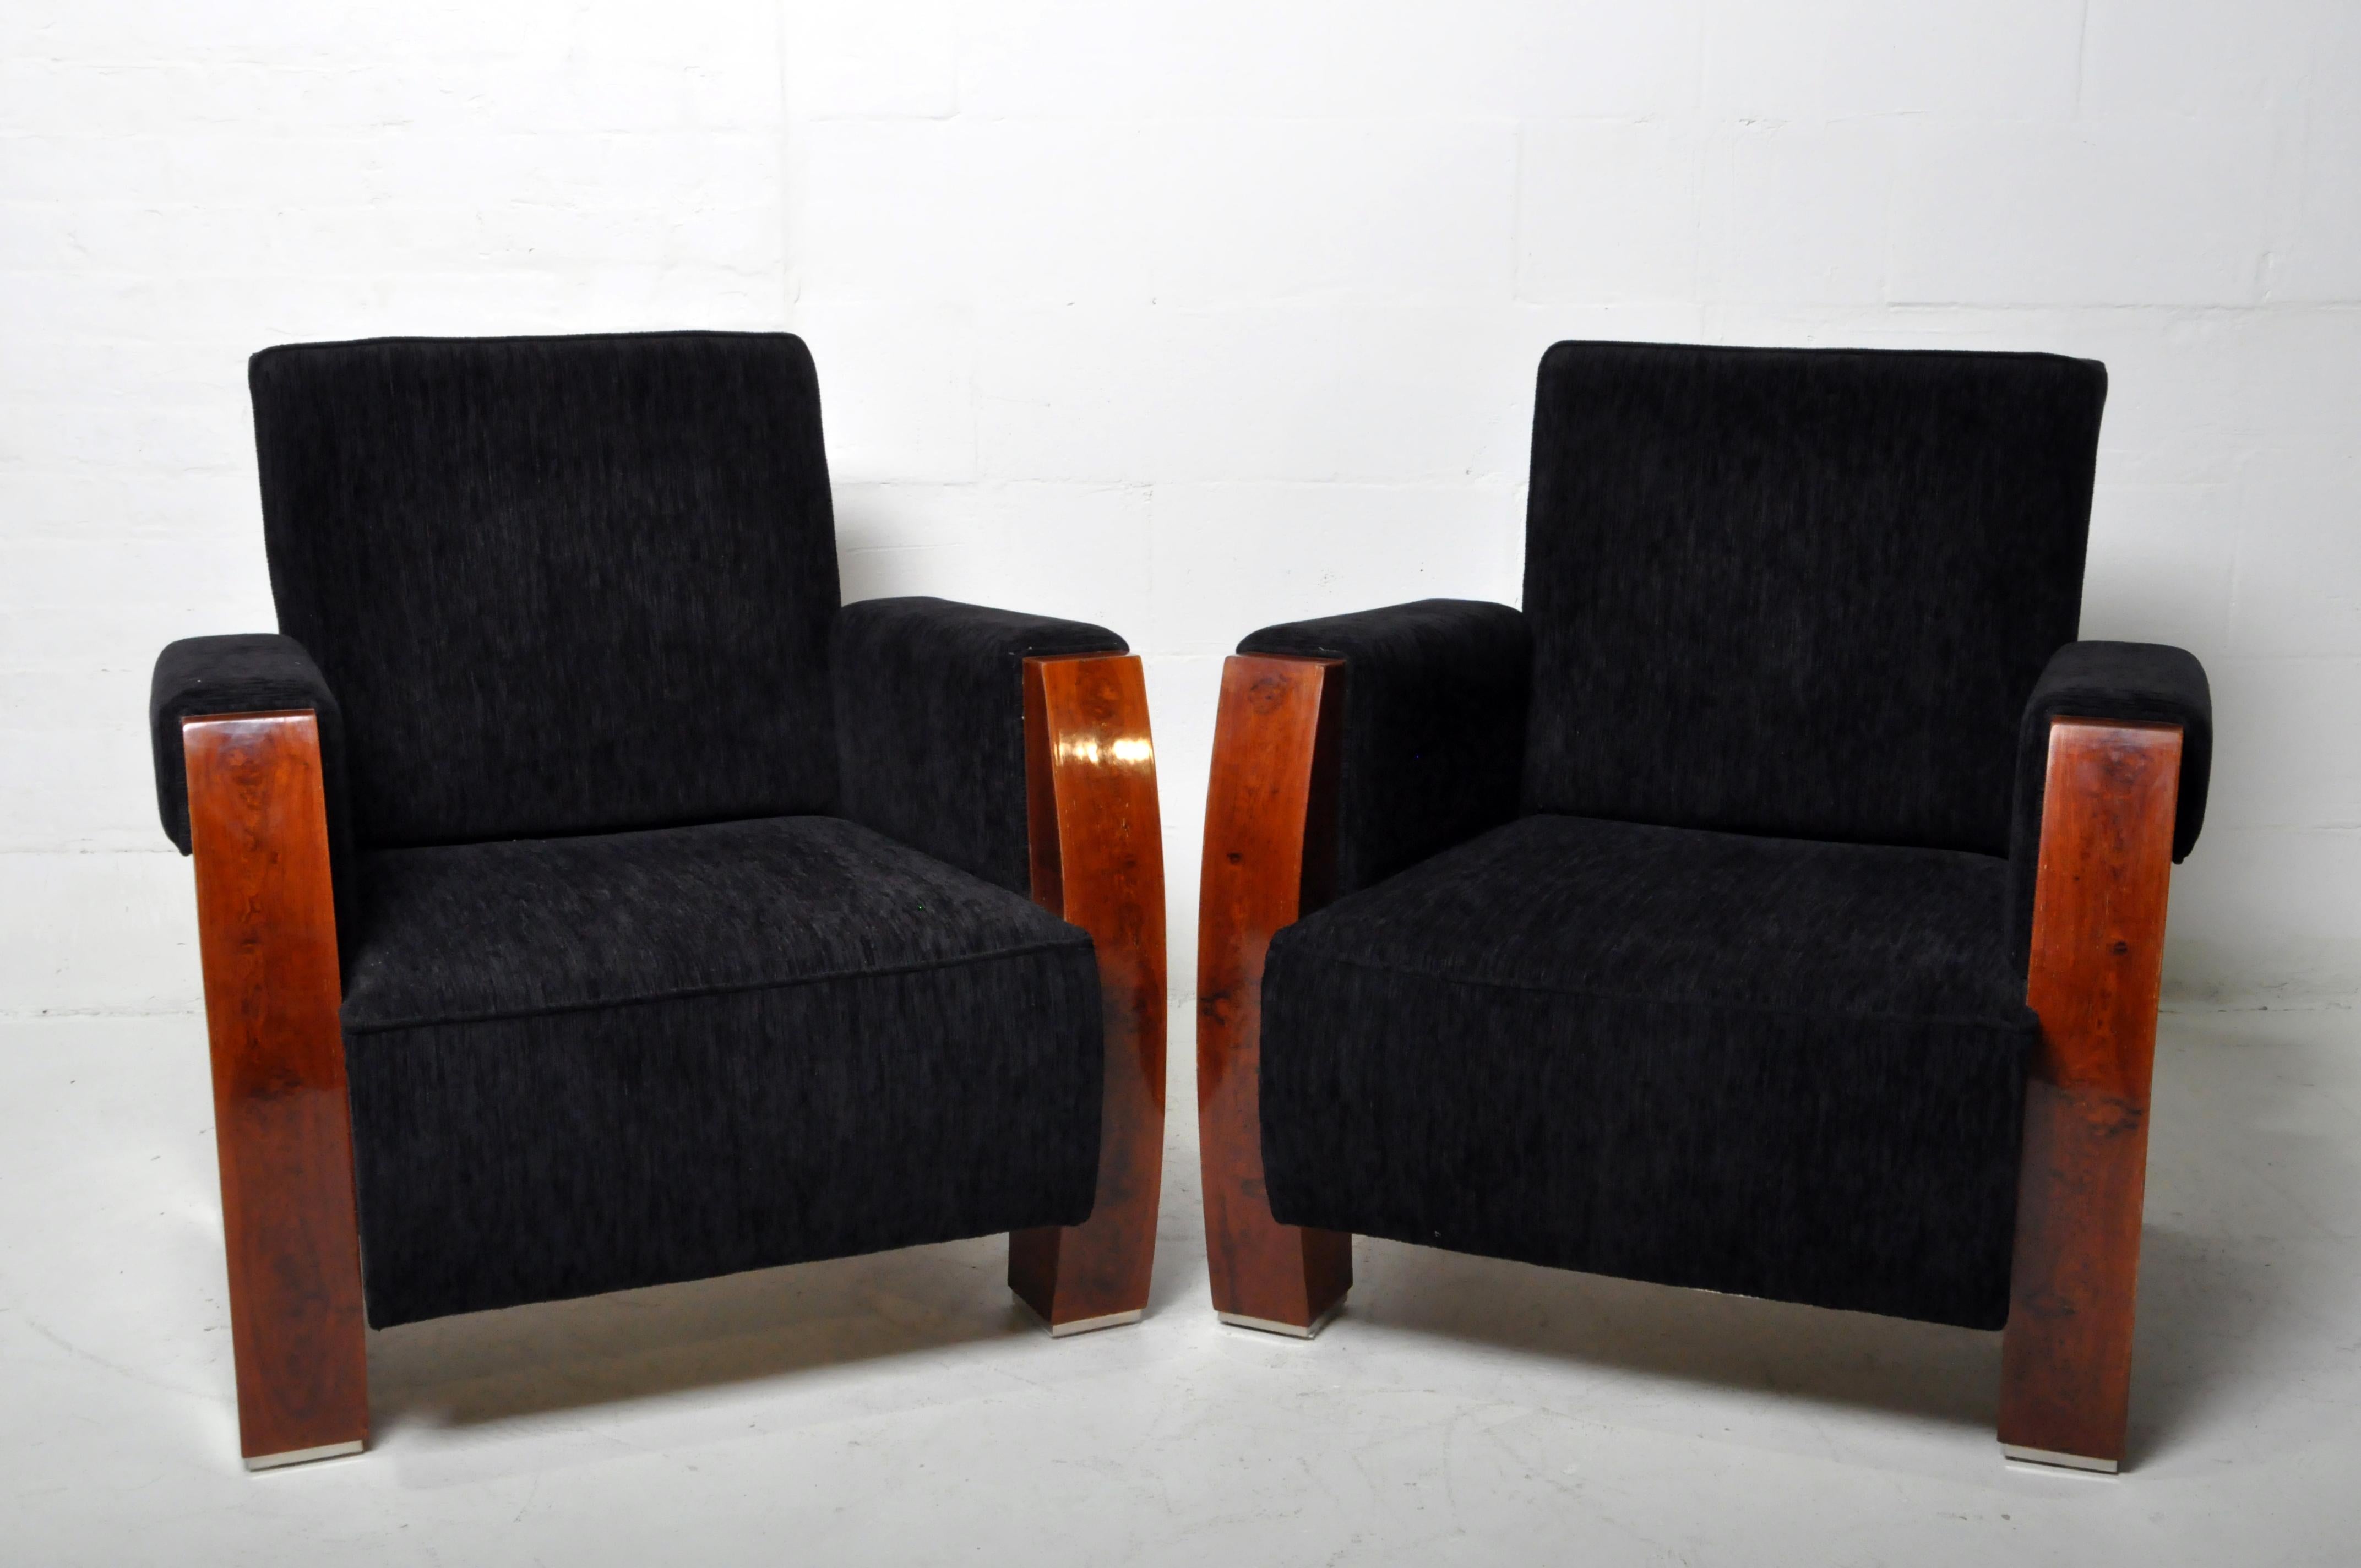 A pair of Hungarian Mid-Century style arm chairs with walnut veneer and chenille upholstery. Hungarian furniture makers have been exceptionally skilled with wood veneers since the Biedermeier era. These stylish chairs date to the 1950's and draw on